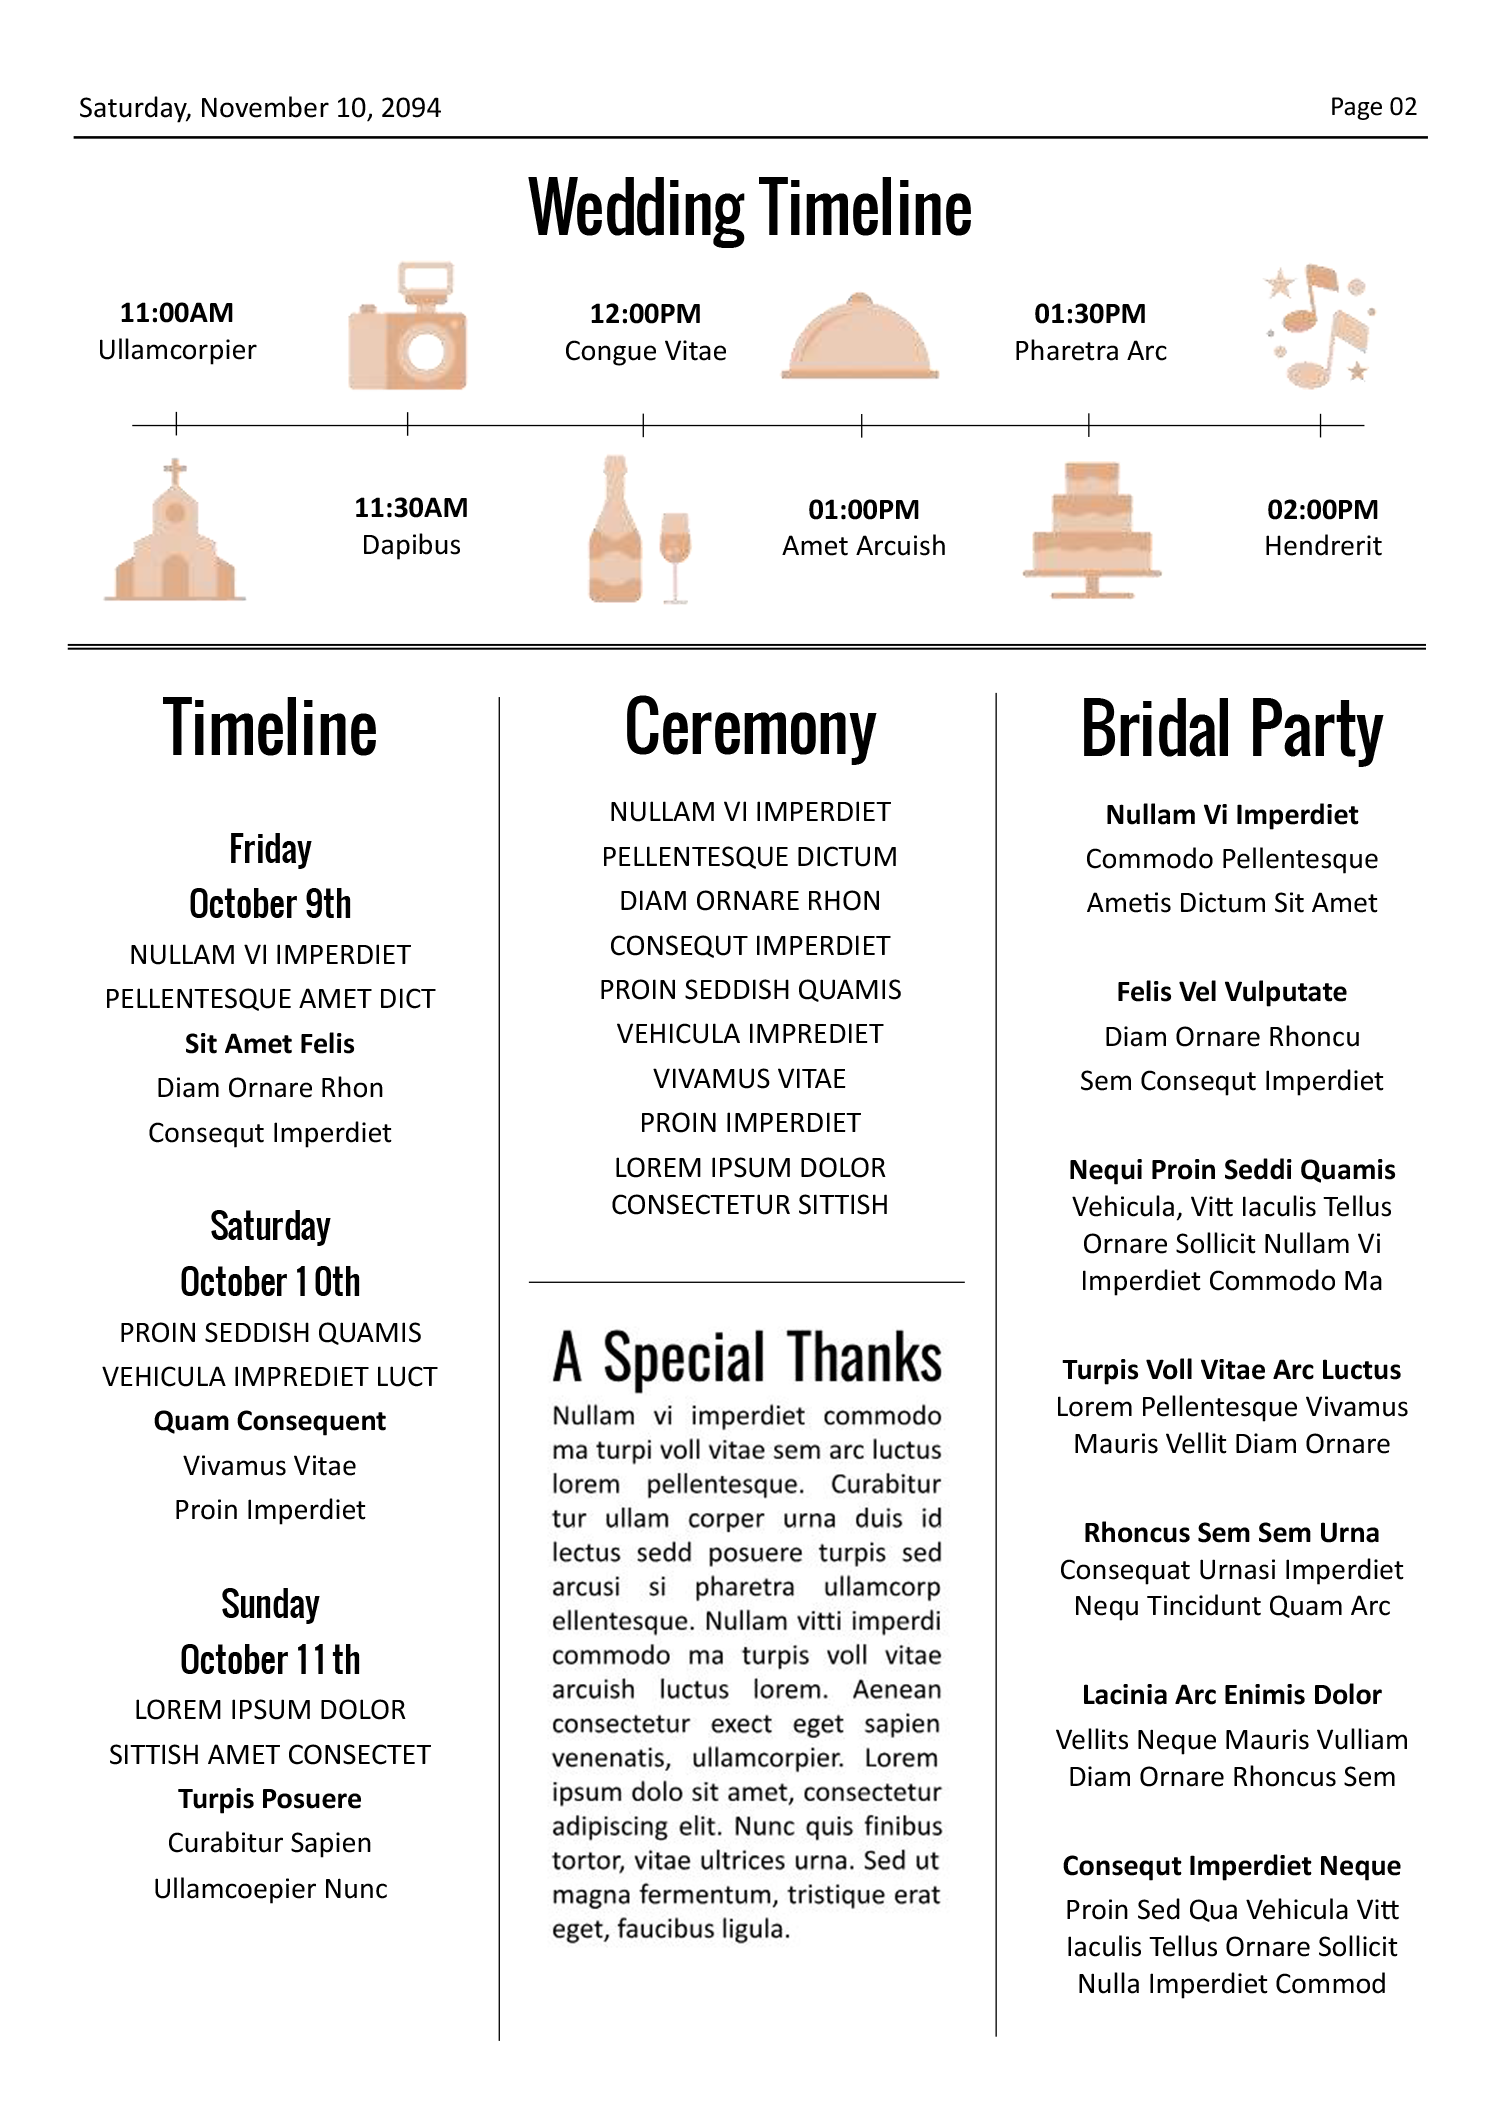 White Paper Wedding Newspaper Template - Page 02